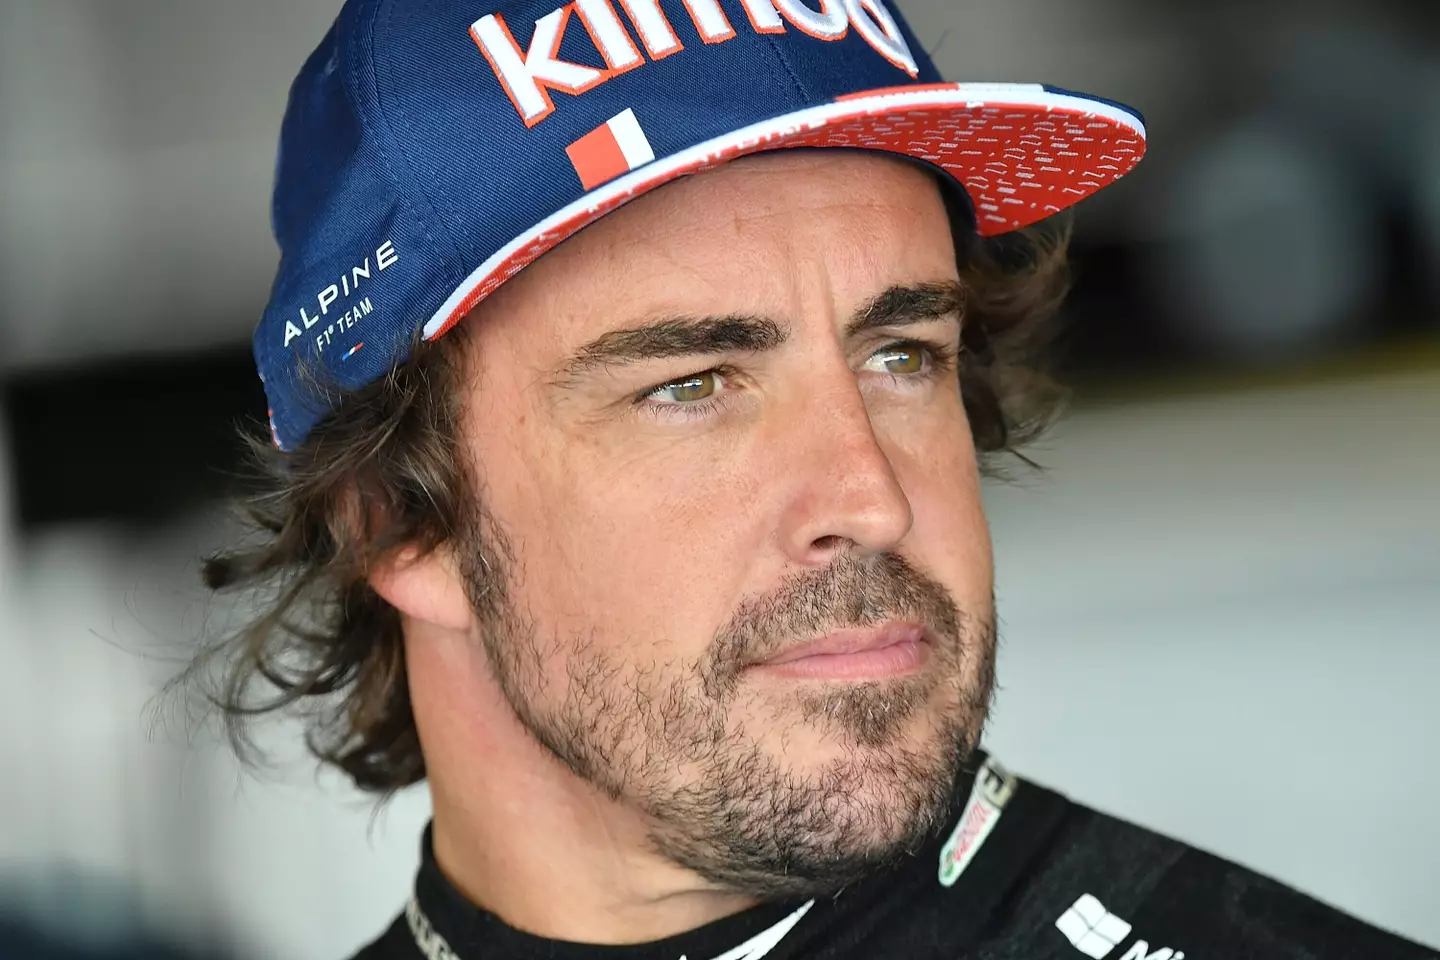 Two-time world champion Fernando Alonso says the trophy could have been "split in two" this season (Image credit: PA)